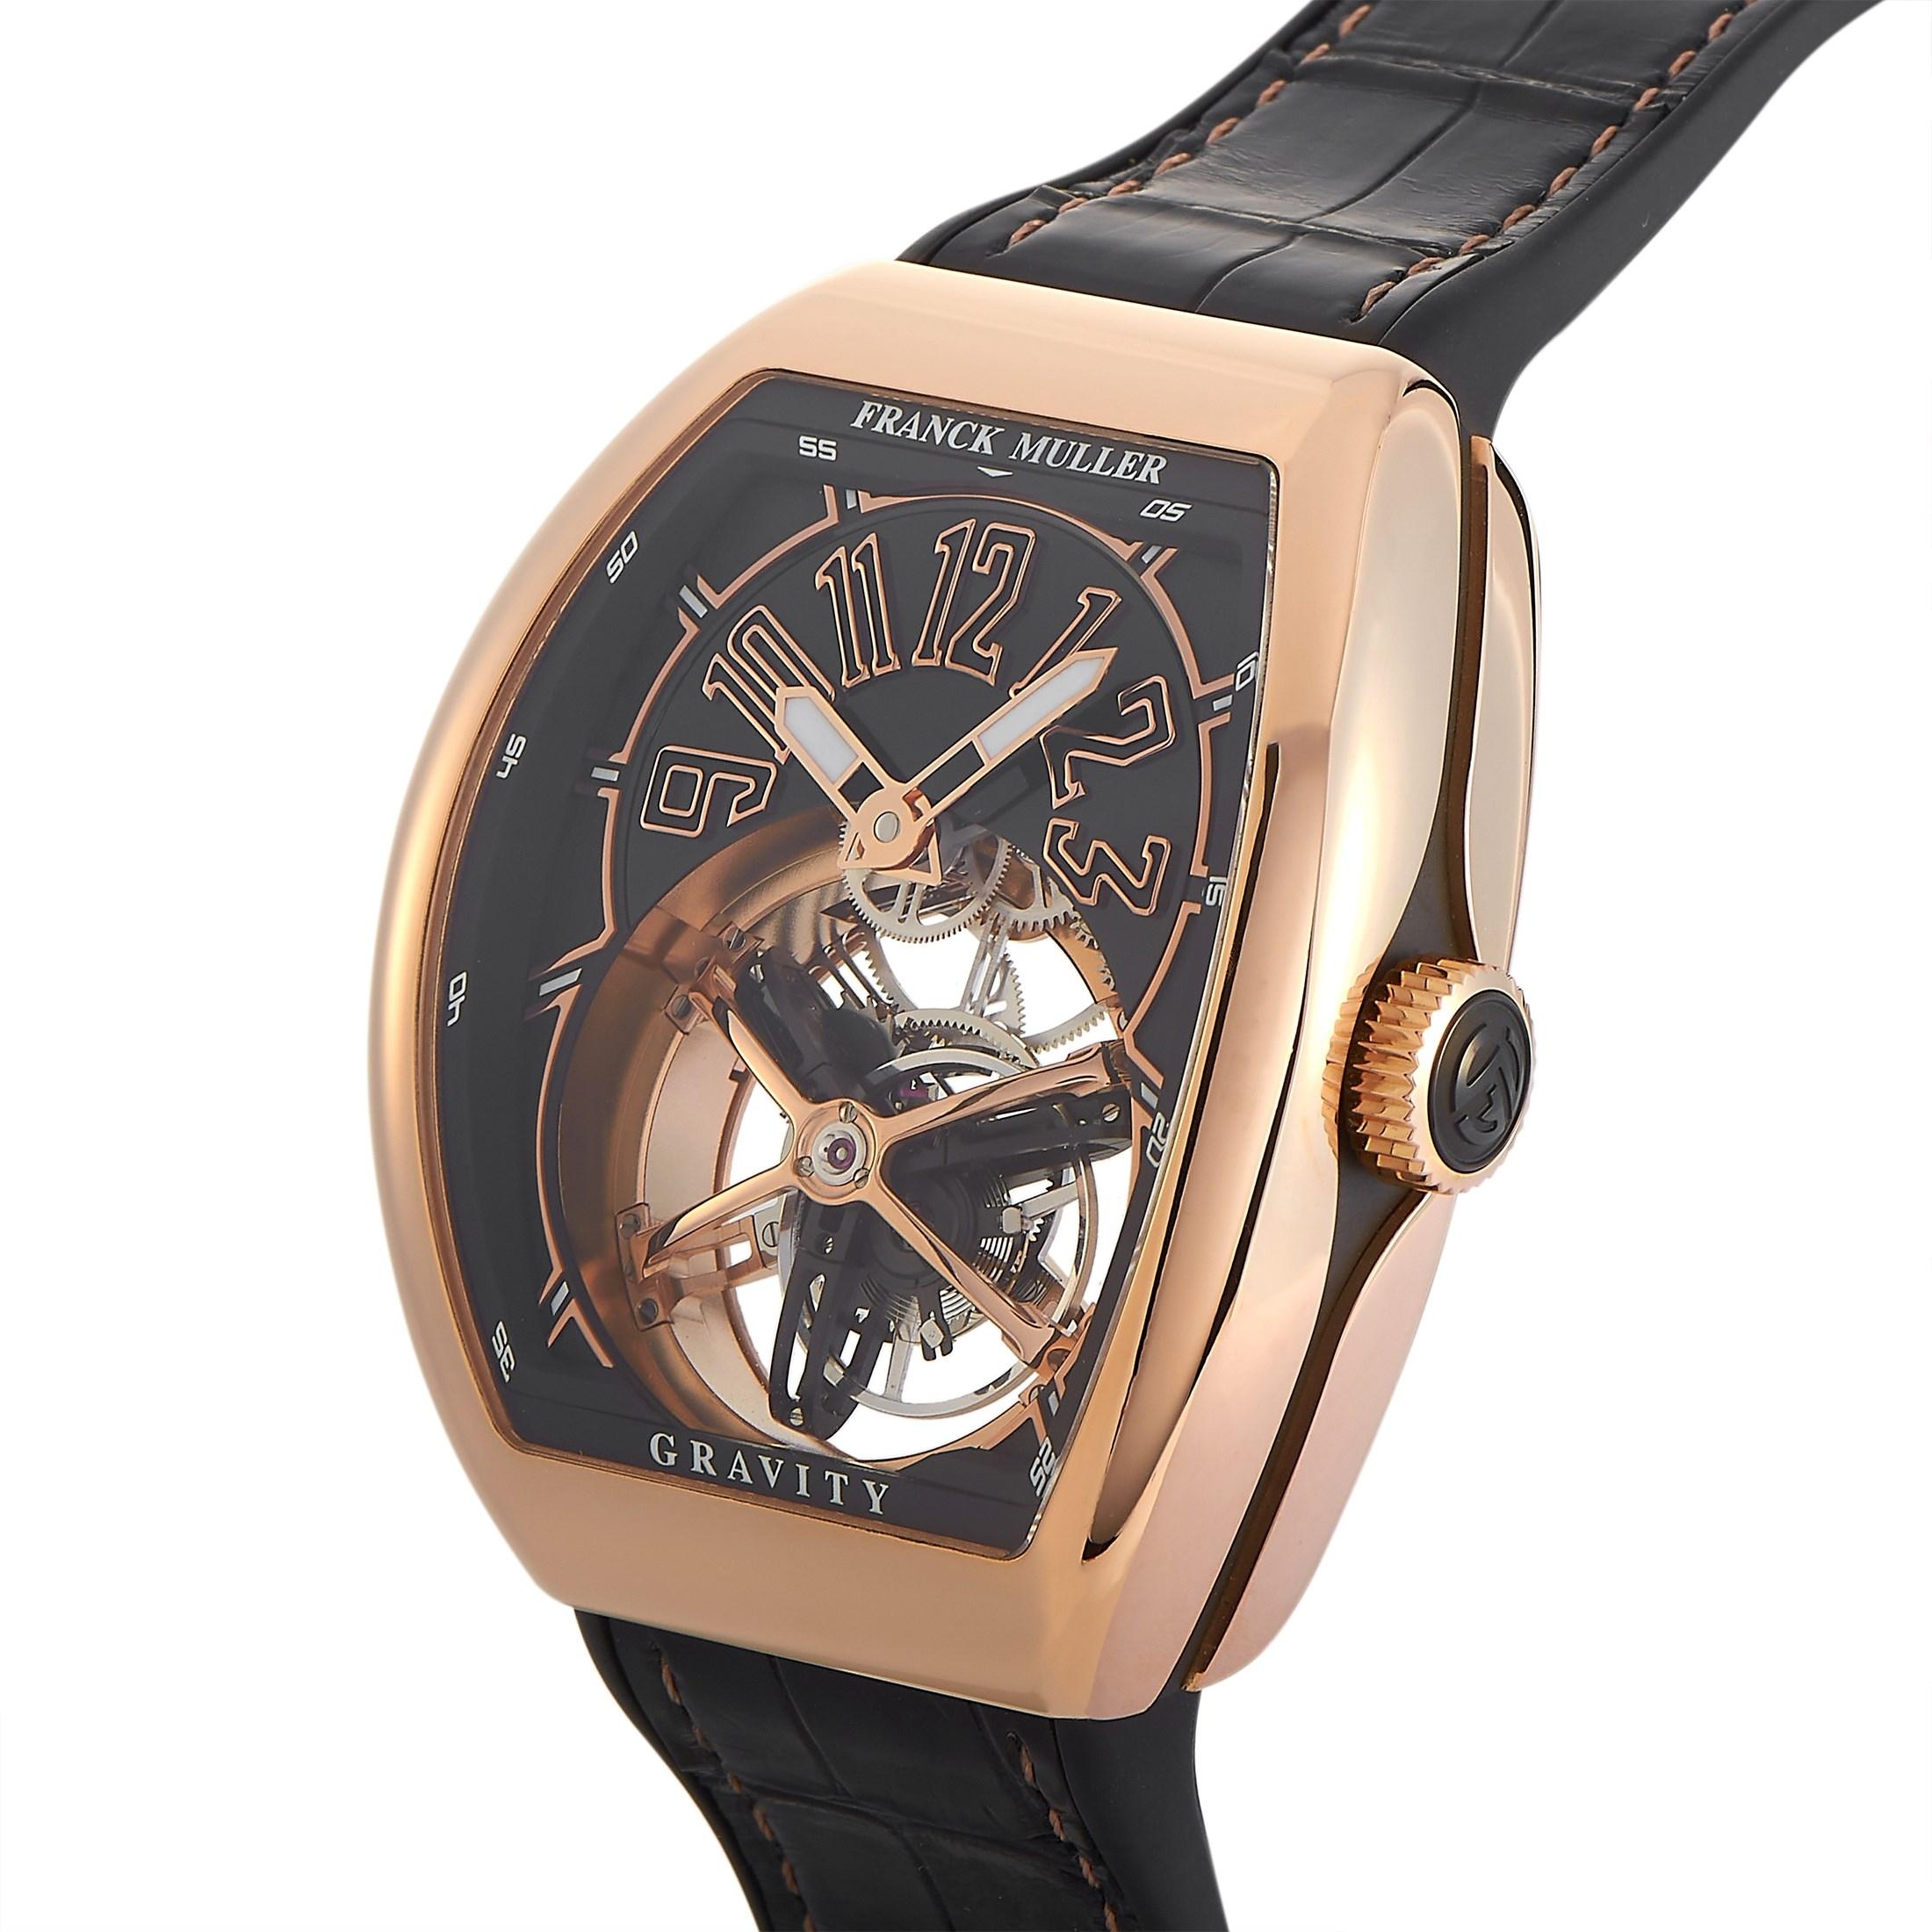 This Franck Muller Vanguard Gravity Tourbillon Watch features a rose gold case that measures 44 mm in diameter. The transparent case back offers a glimpse into the beautiful inner workings of the timepiece. The case is presented on a sleek black